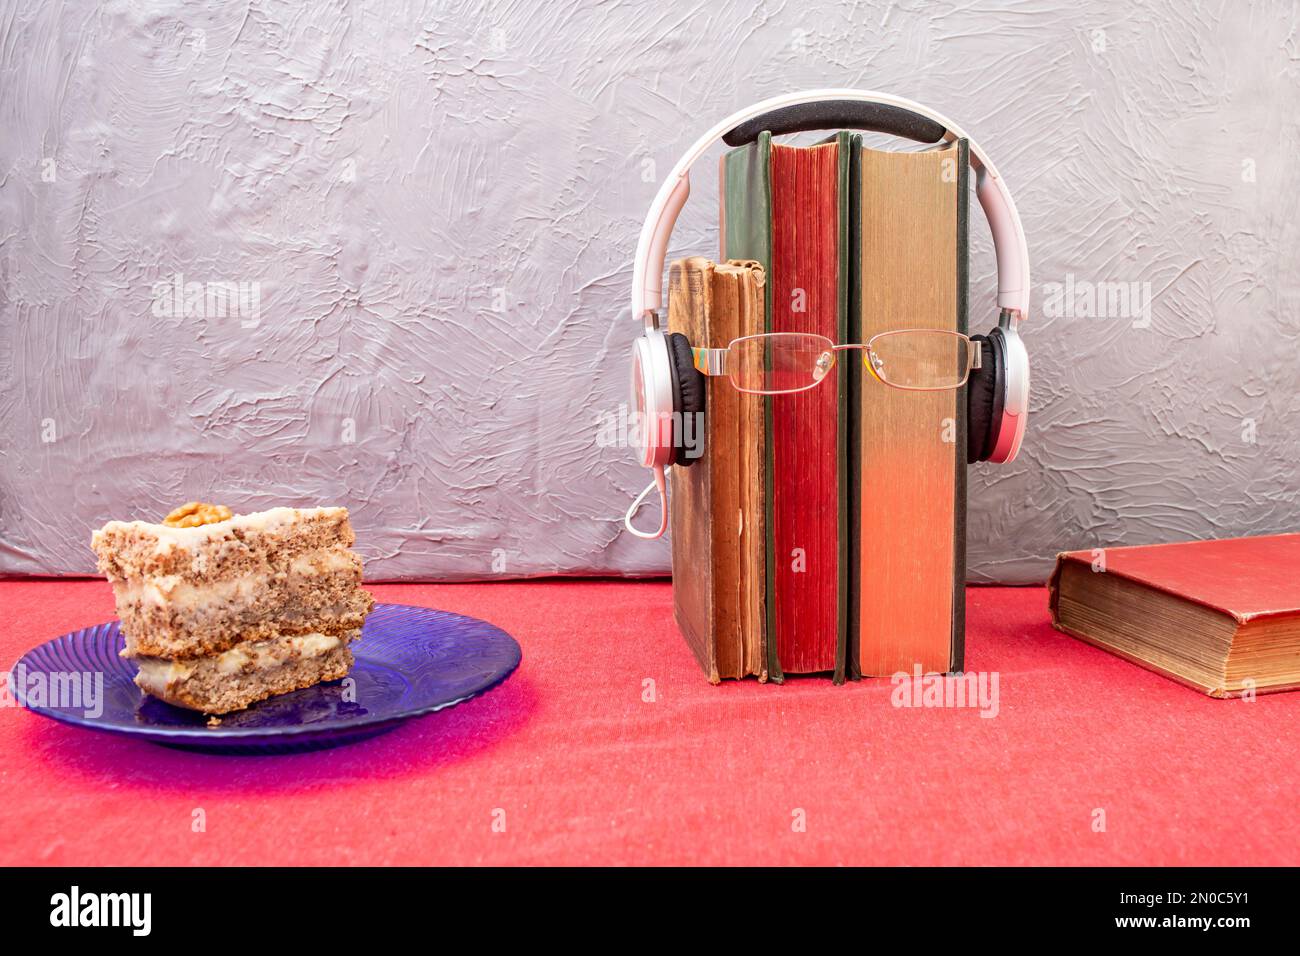 vintage books, and a layered cake on a blue glass plate, Reading at breakfast  concept Stock Photo